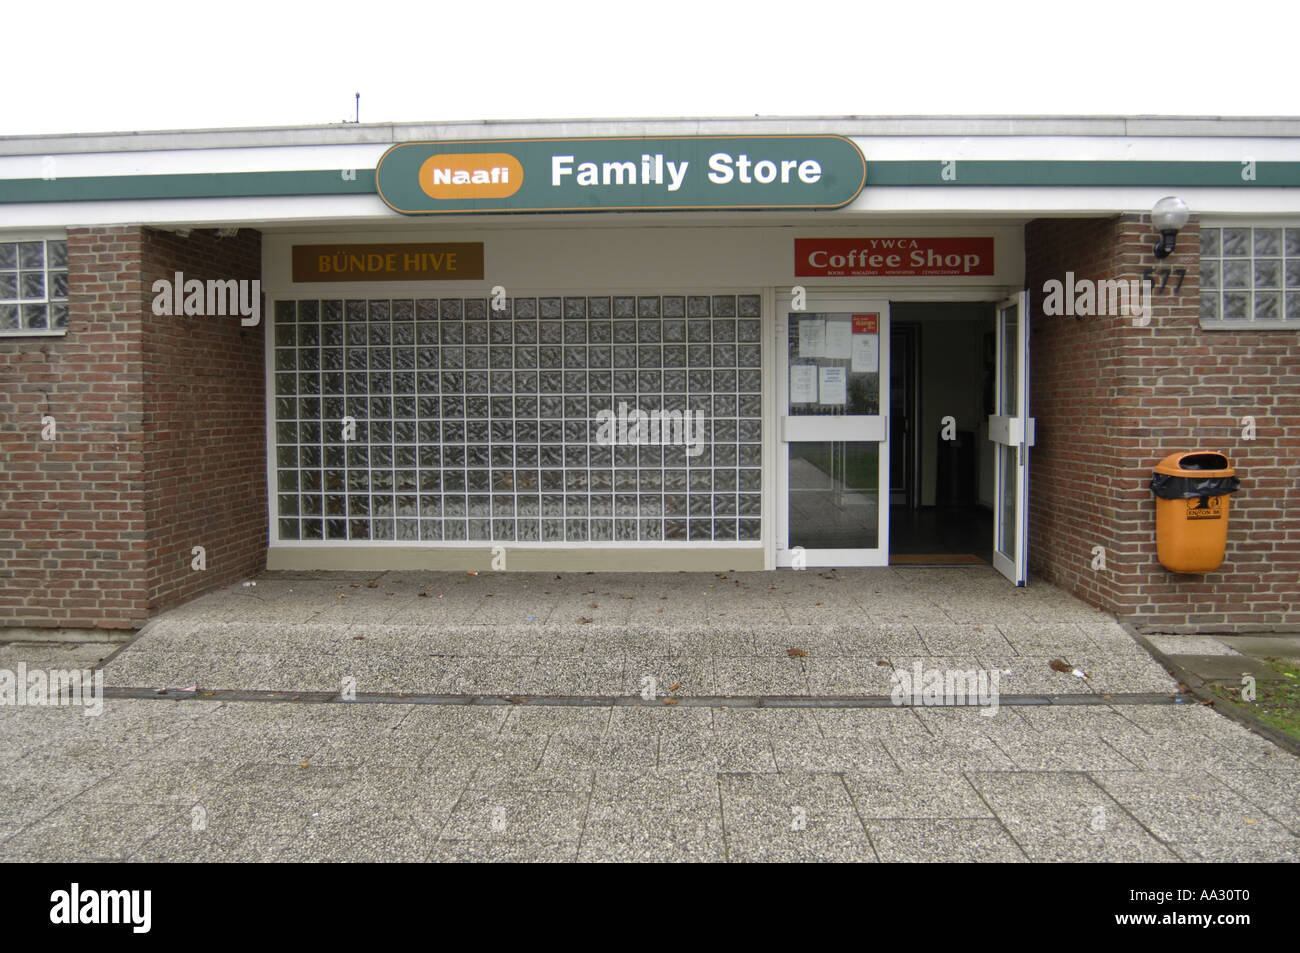 naafi store shop british army germany german deustchland deutsch  consumerism building shopping family store Stock Photo - Alamy